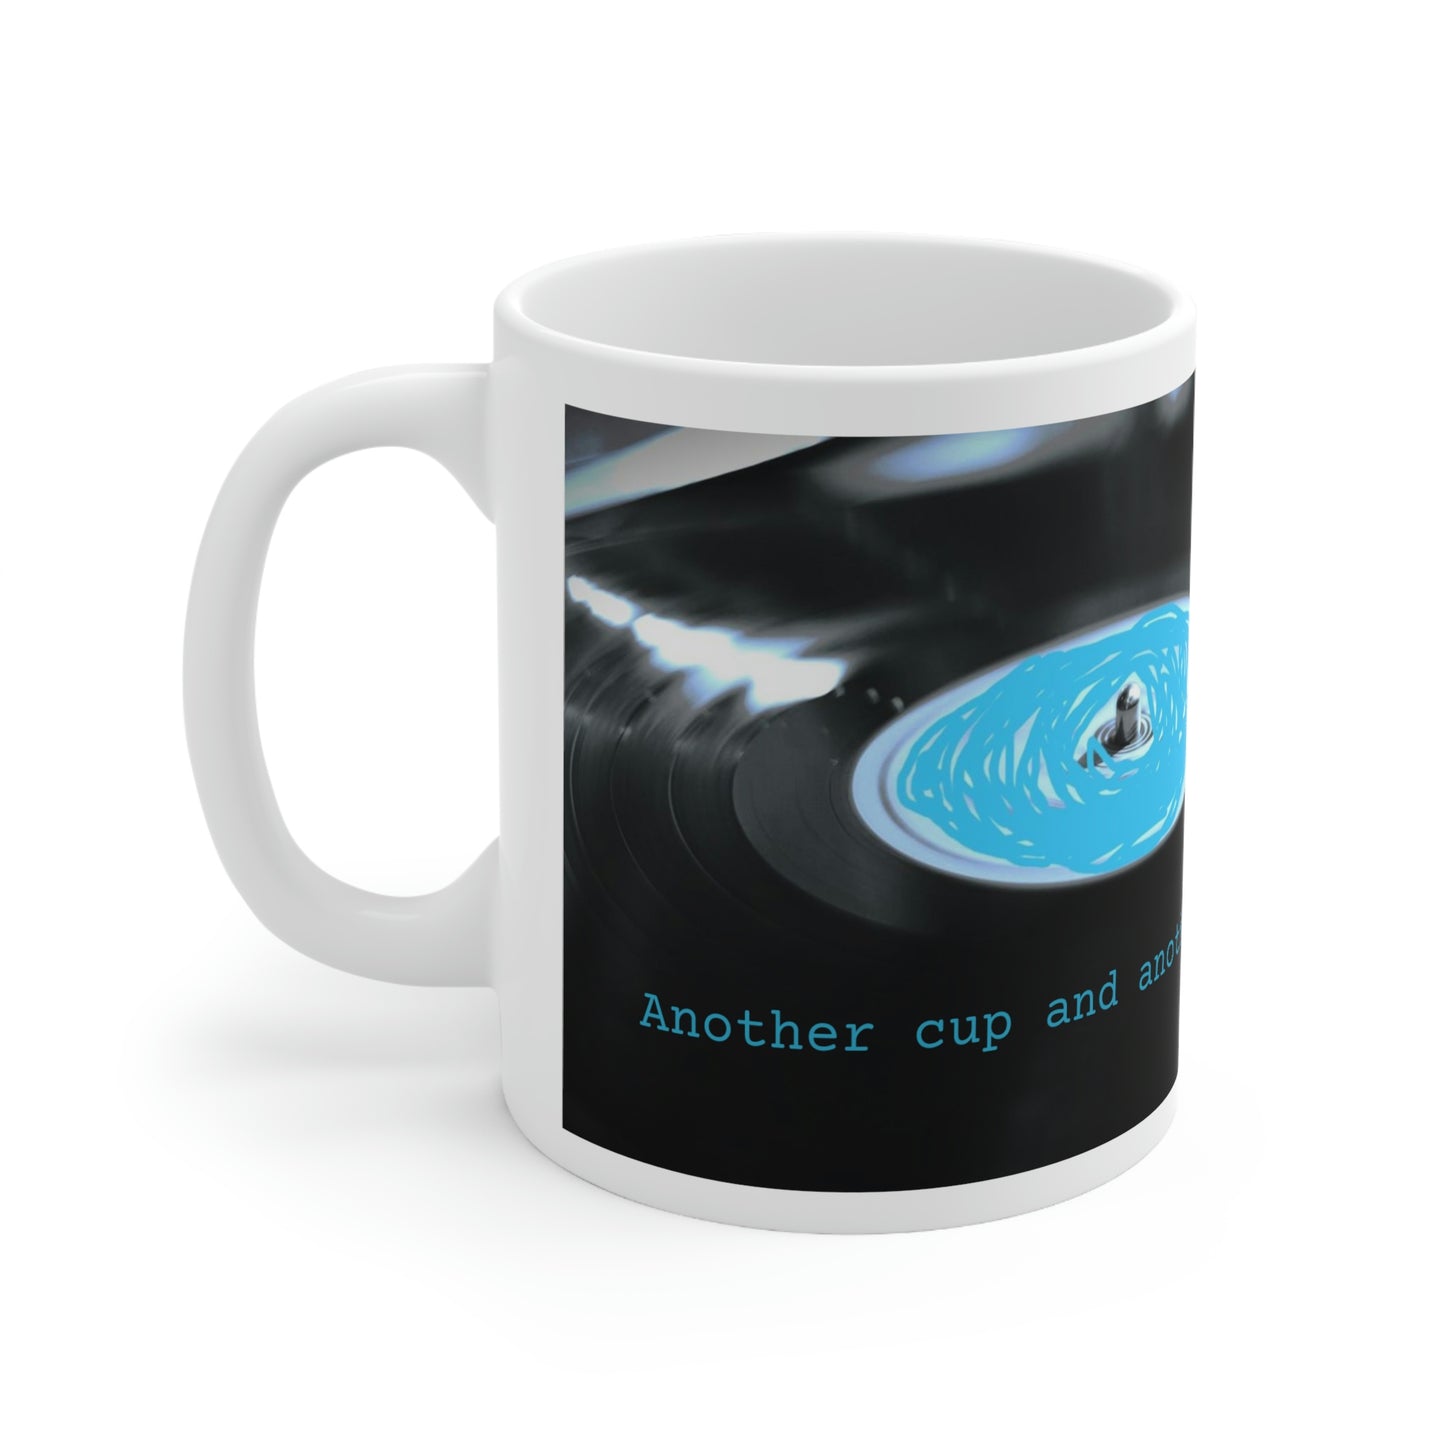 Another cup and another spin please ... - Blue Record Player - Ceramic Mug 11oz - Limited Edition